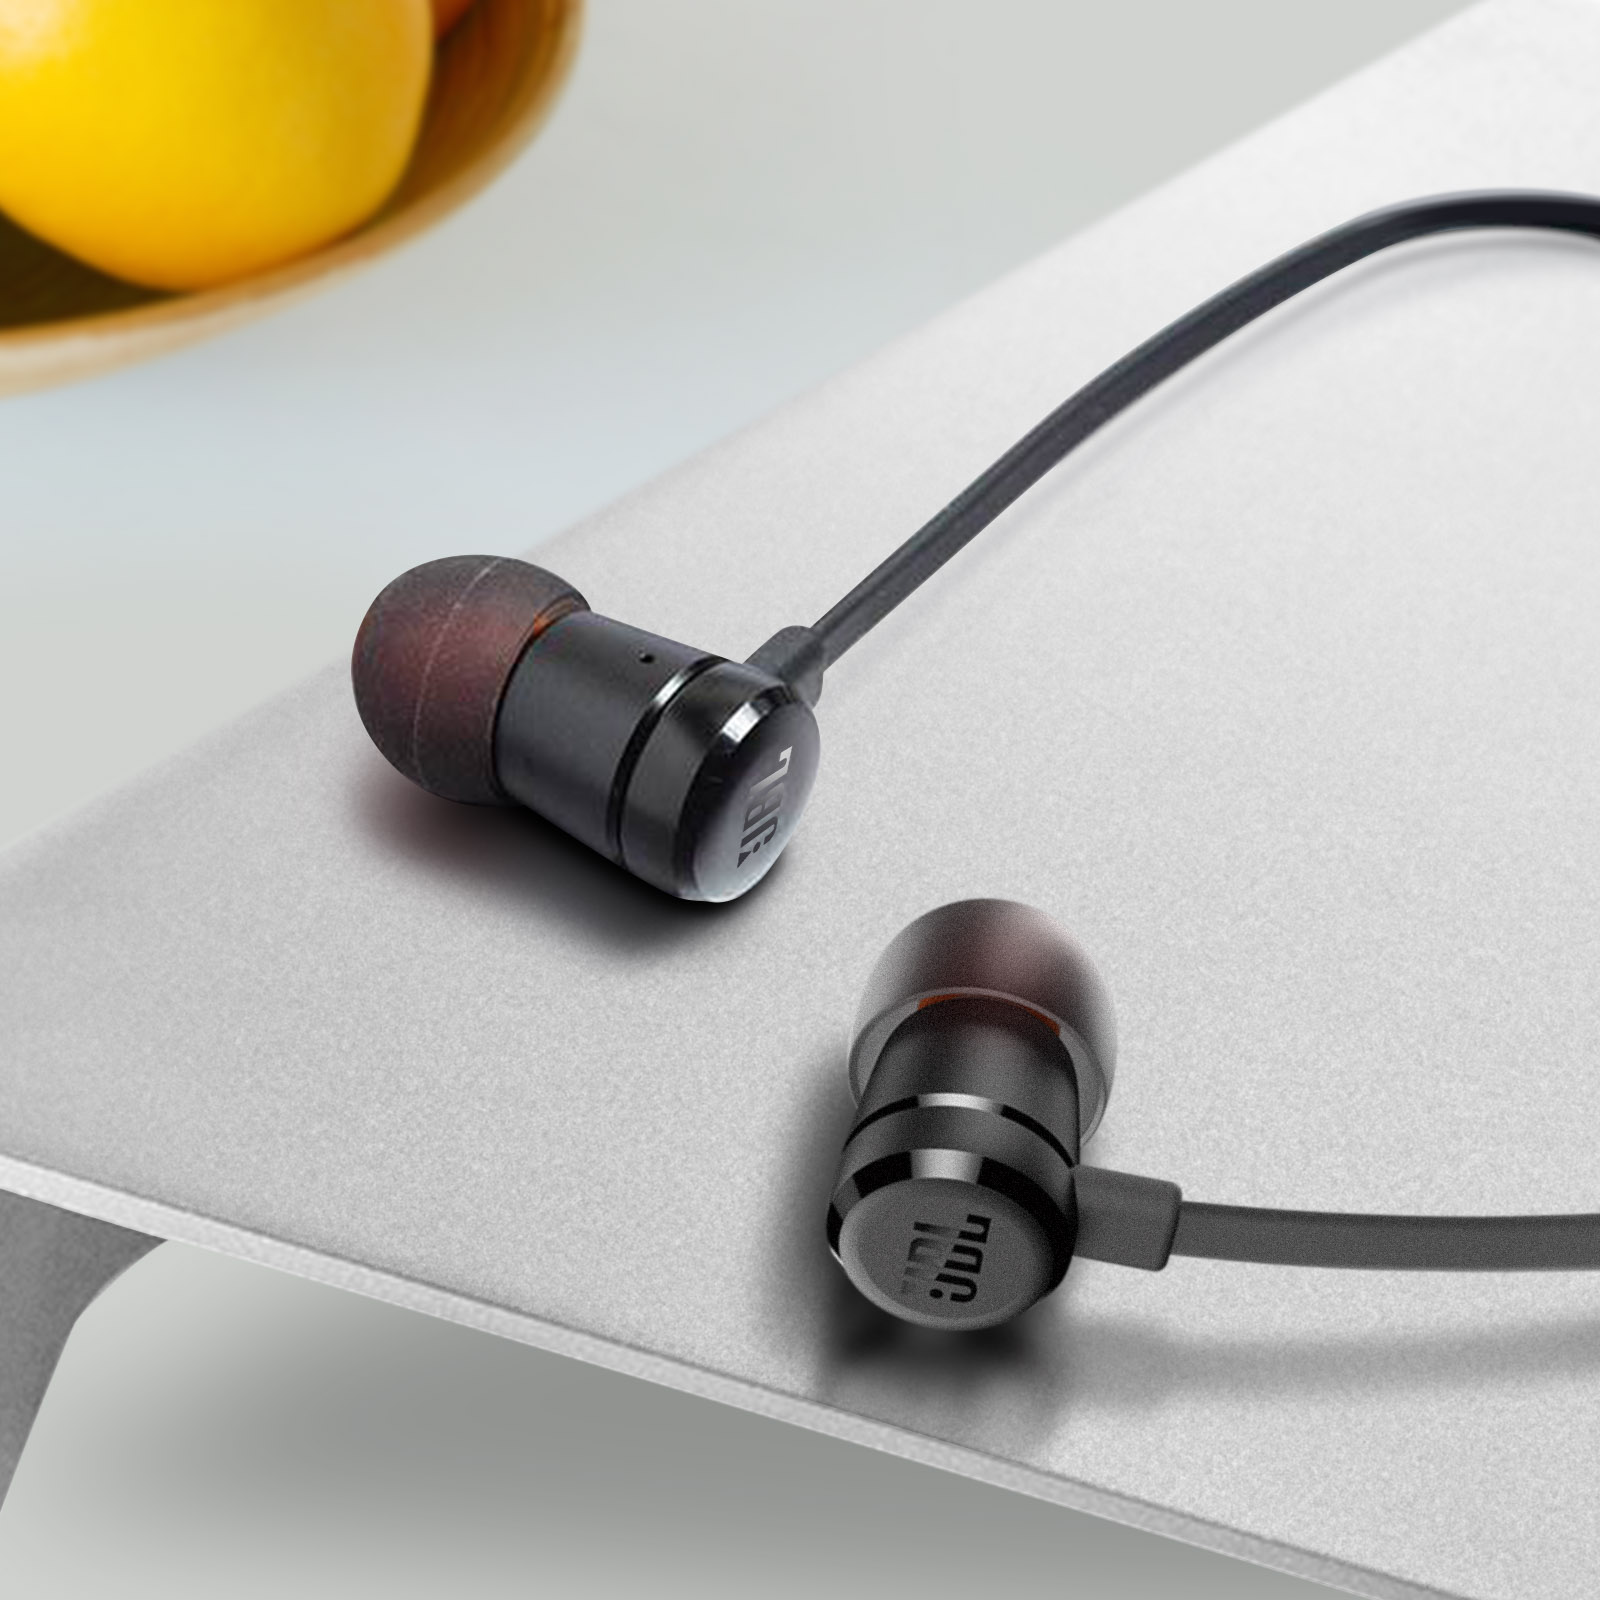 Ecouteurs intra-auriculaires filaire avec micro - JBL Tune 290